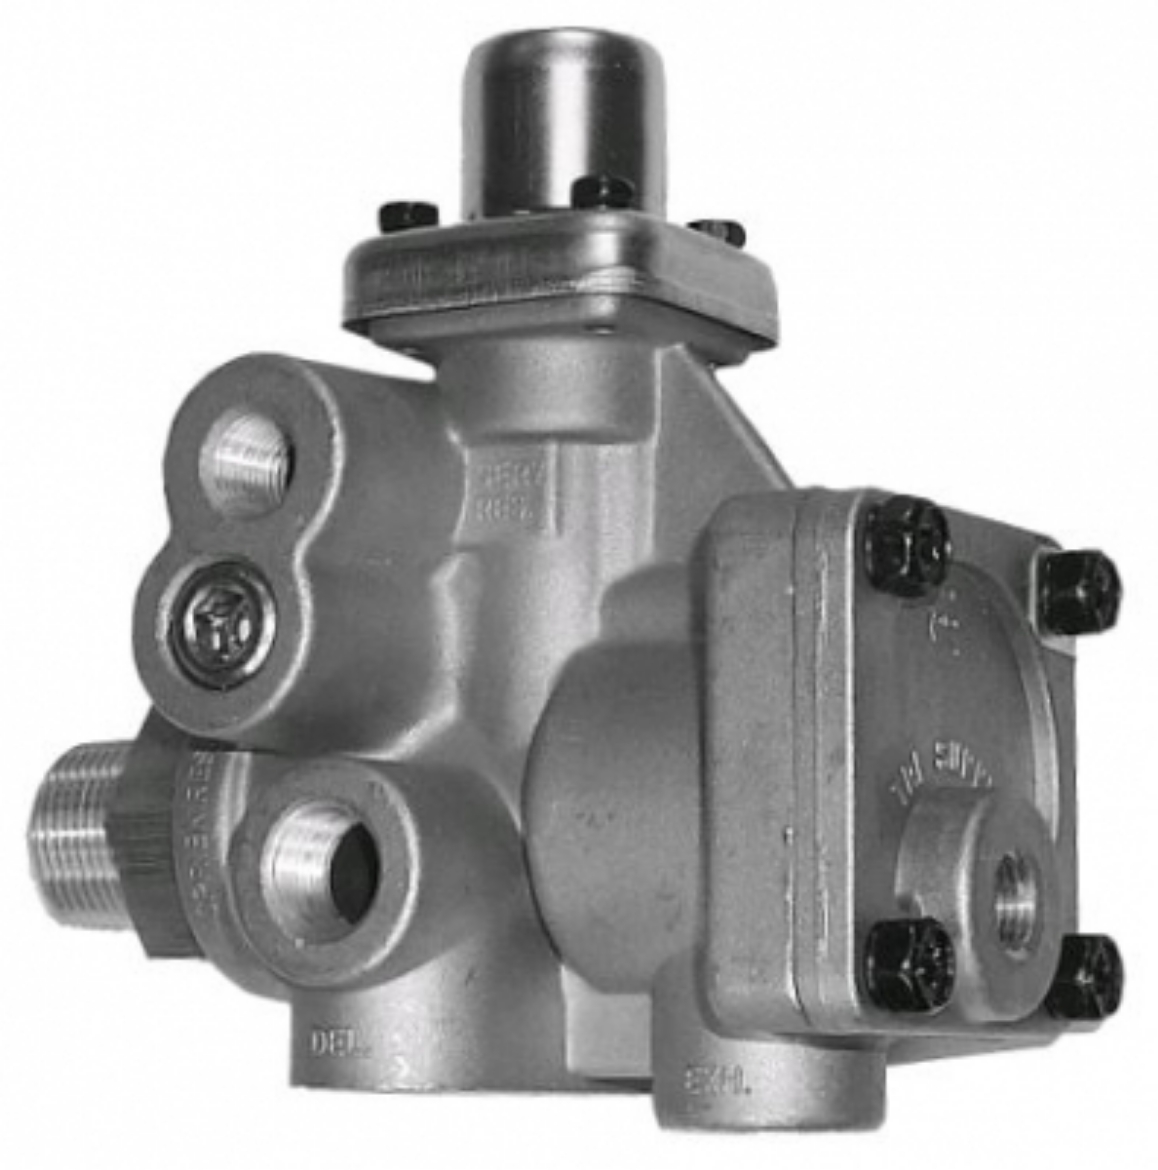 Picture of SPRING BRAKE VALVE SR2 STYLE (NO CHECK VALVE IN MOUNTING NIPPLE)
(REPLACES 106835, 287376, 272912)